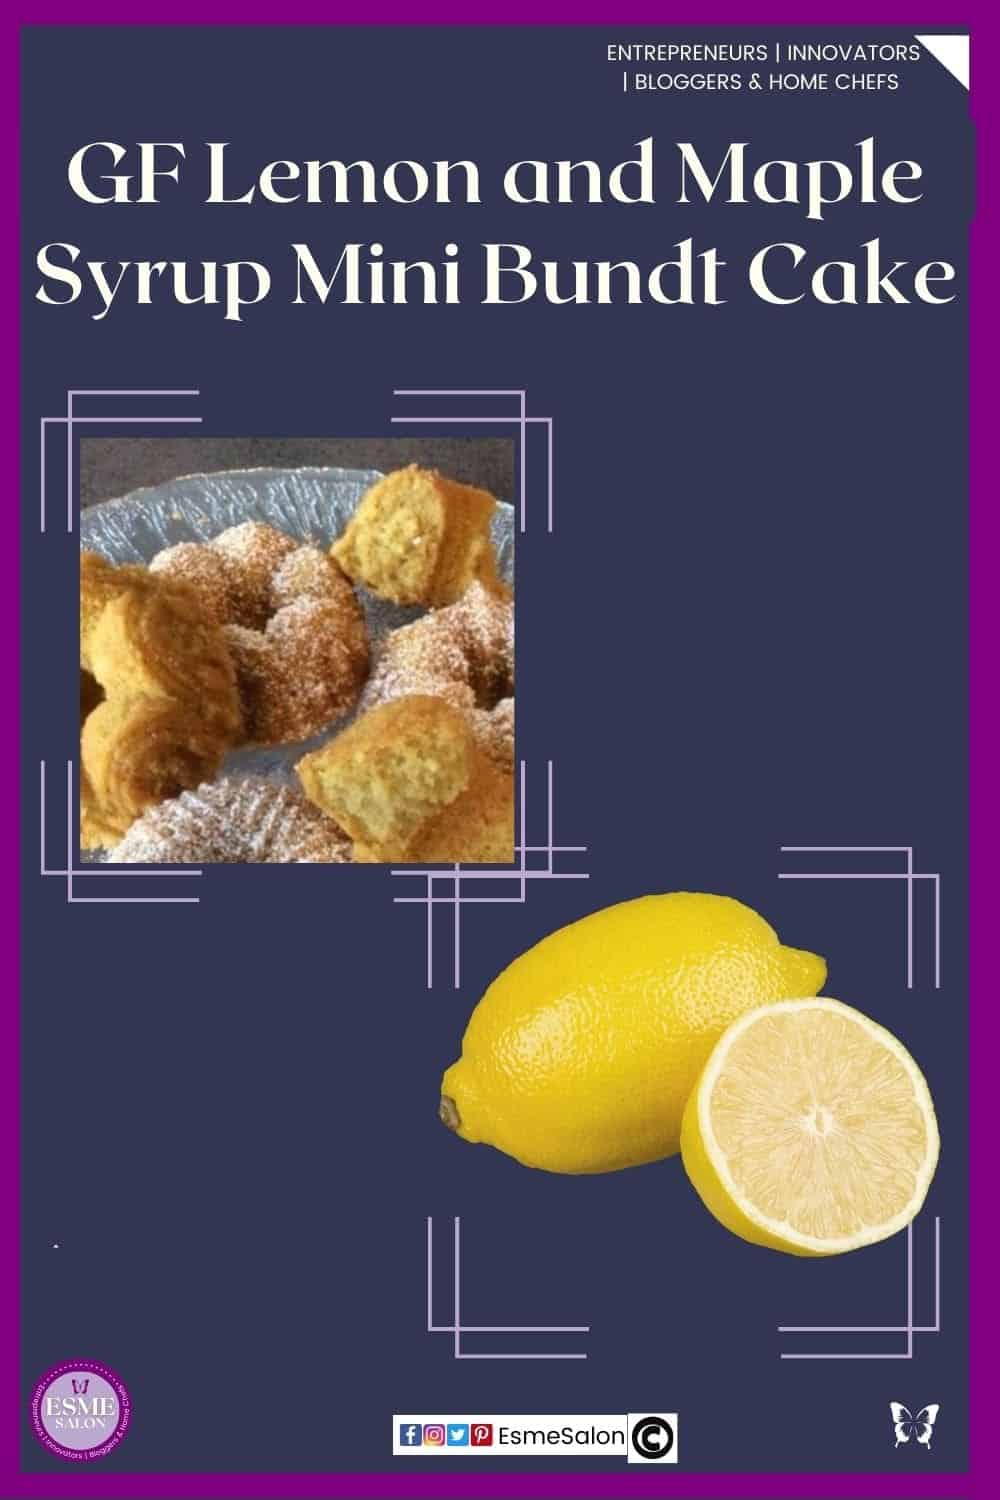 an image of a glass cake stand with Gluten Free Lemon and Maple Syrup Mini Bundt Cake some dusted with confectioners sugar